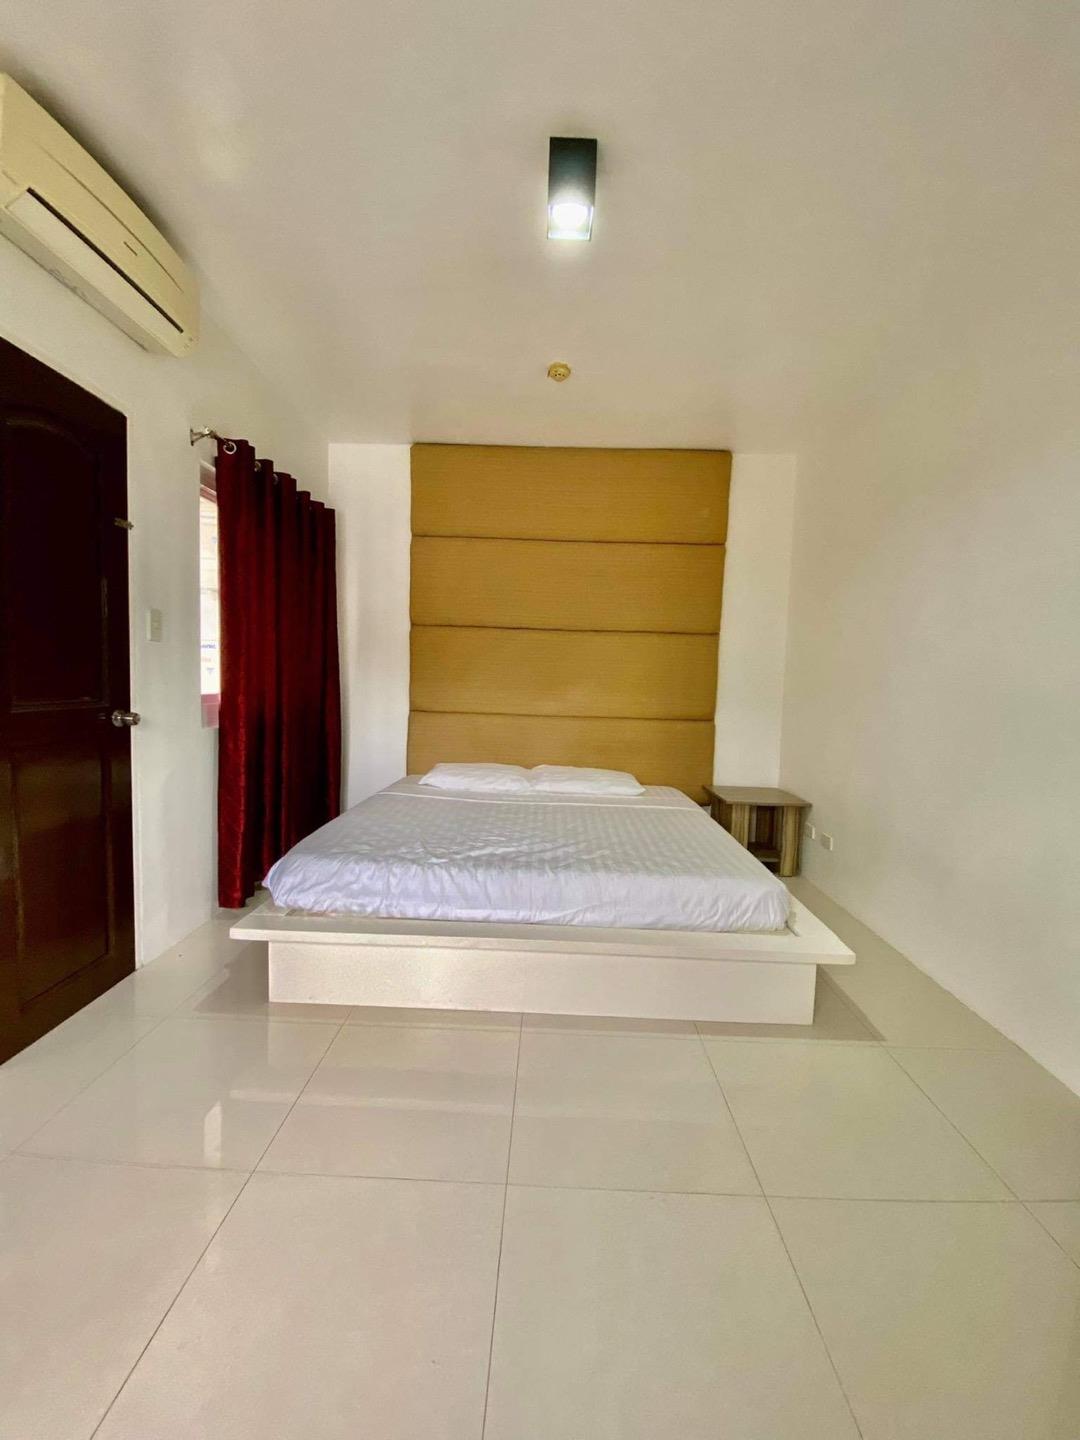 MODERN 2 BEDROOM APARTMENT FOR RENT IN ANGELES PAMPANGA